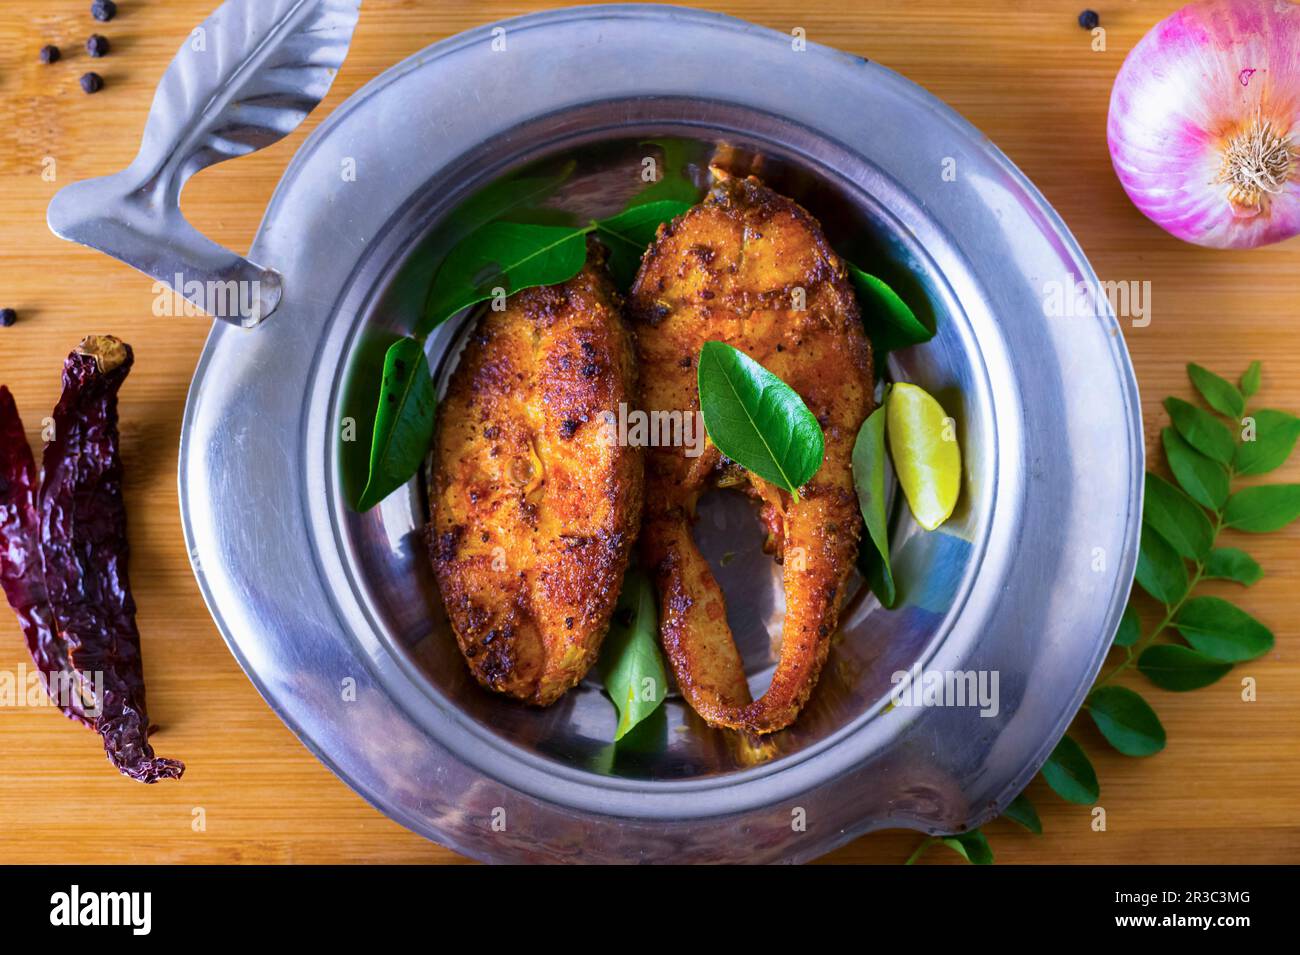 Stock Fish Cutlet